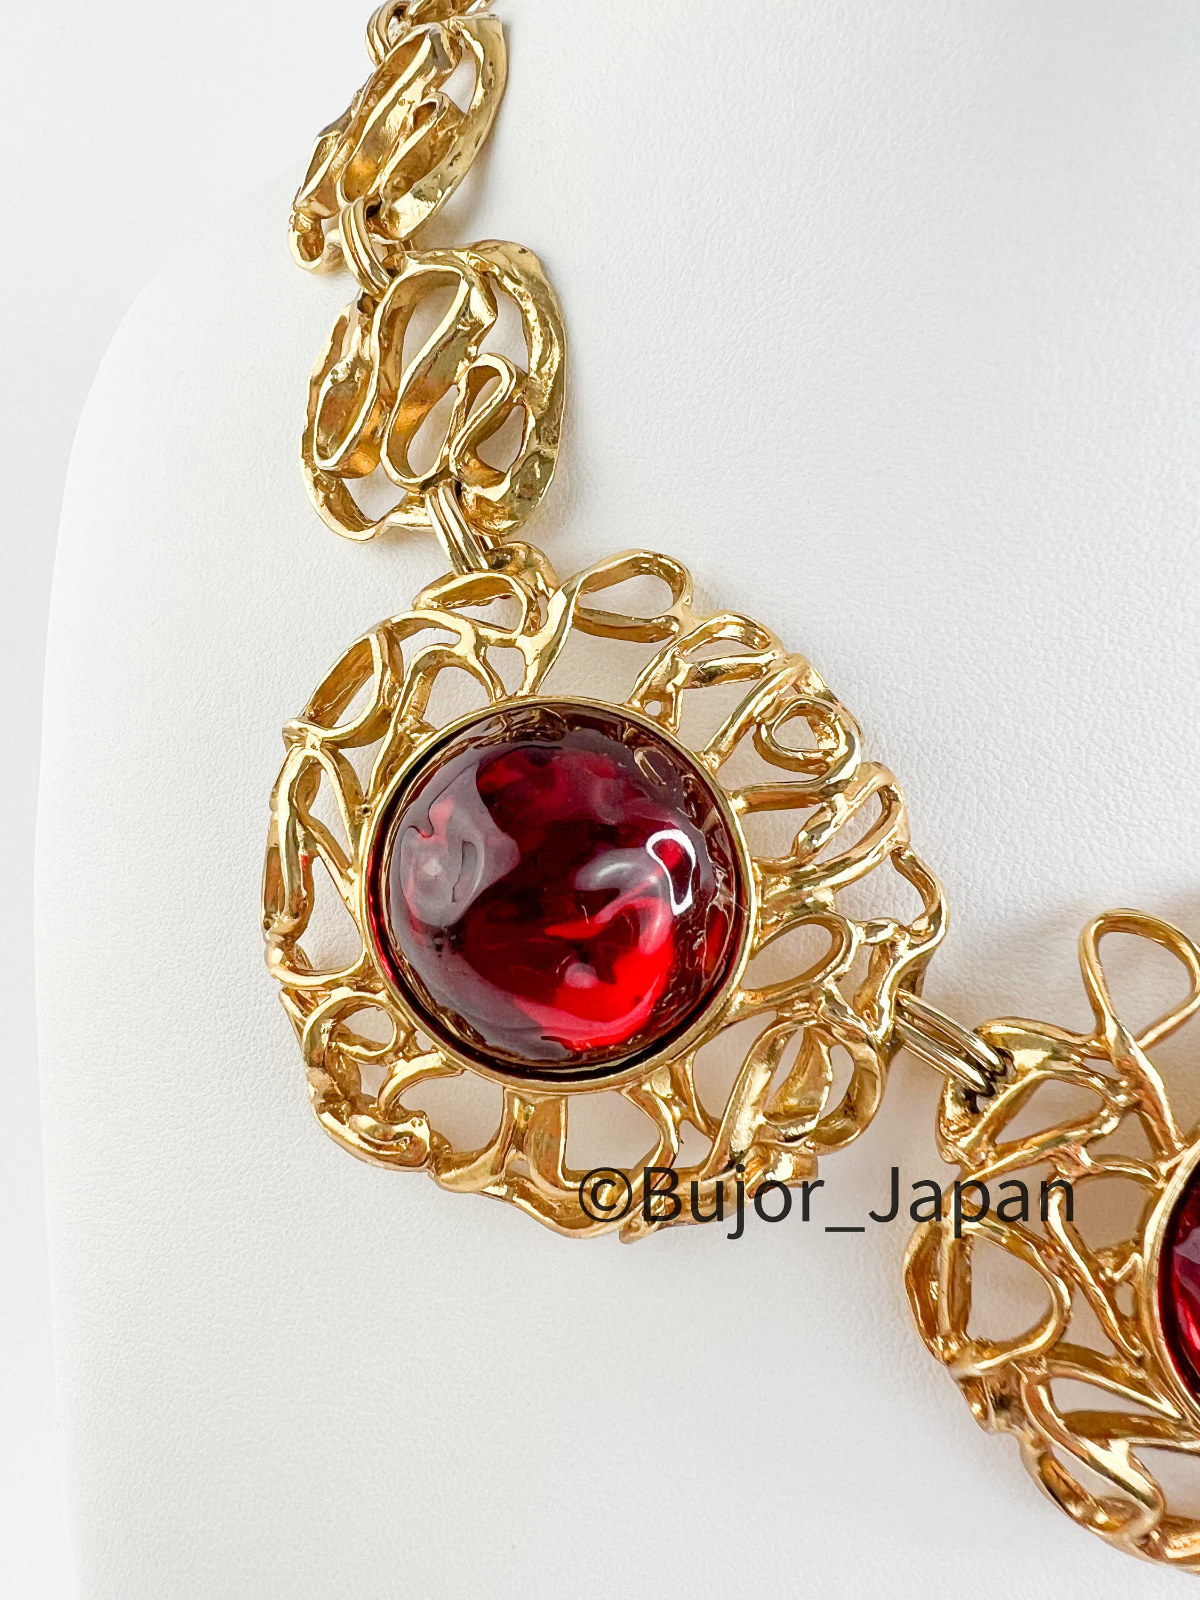 Vintage YSL Yves Saint Laurent Necklace, Made in France, Ruby open work Charm Robert Goossens Necklace, Jewelry for Women, Necklace Large